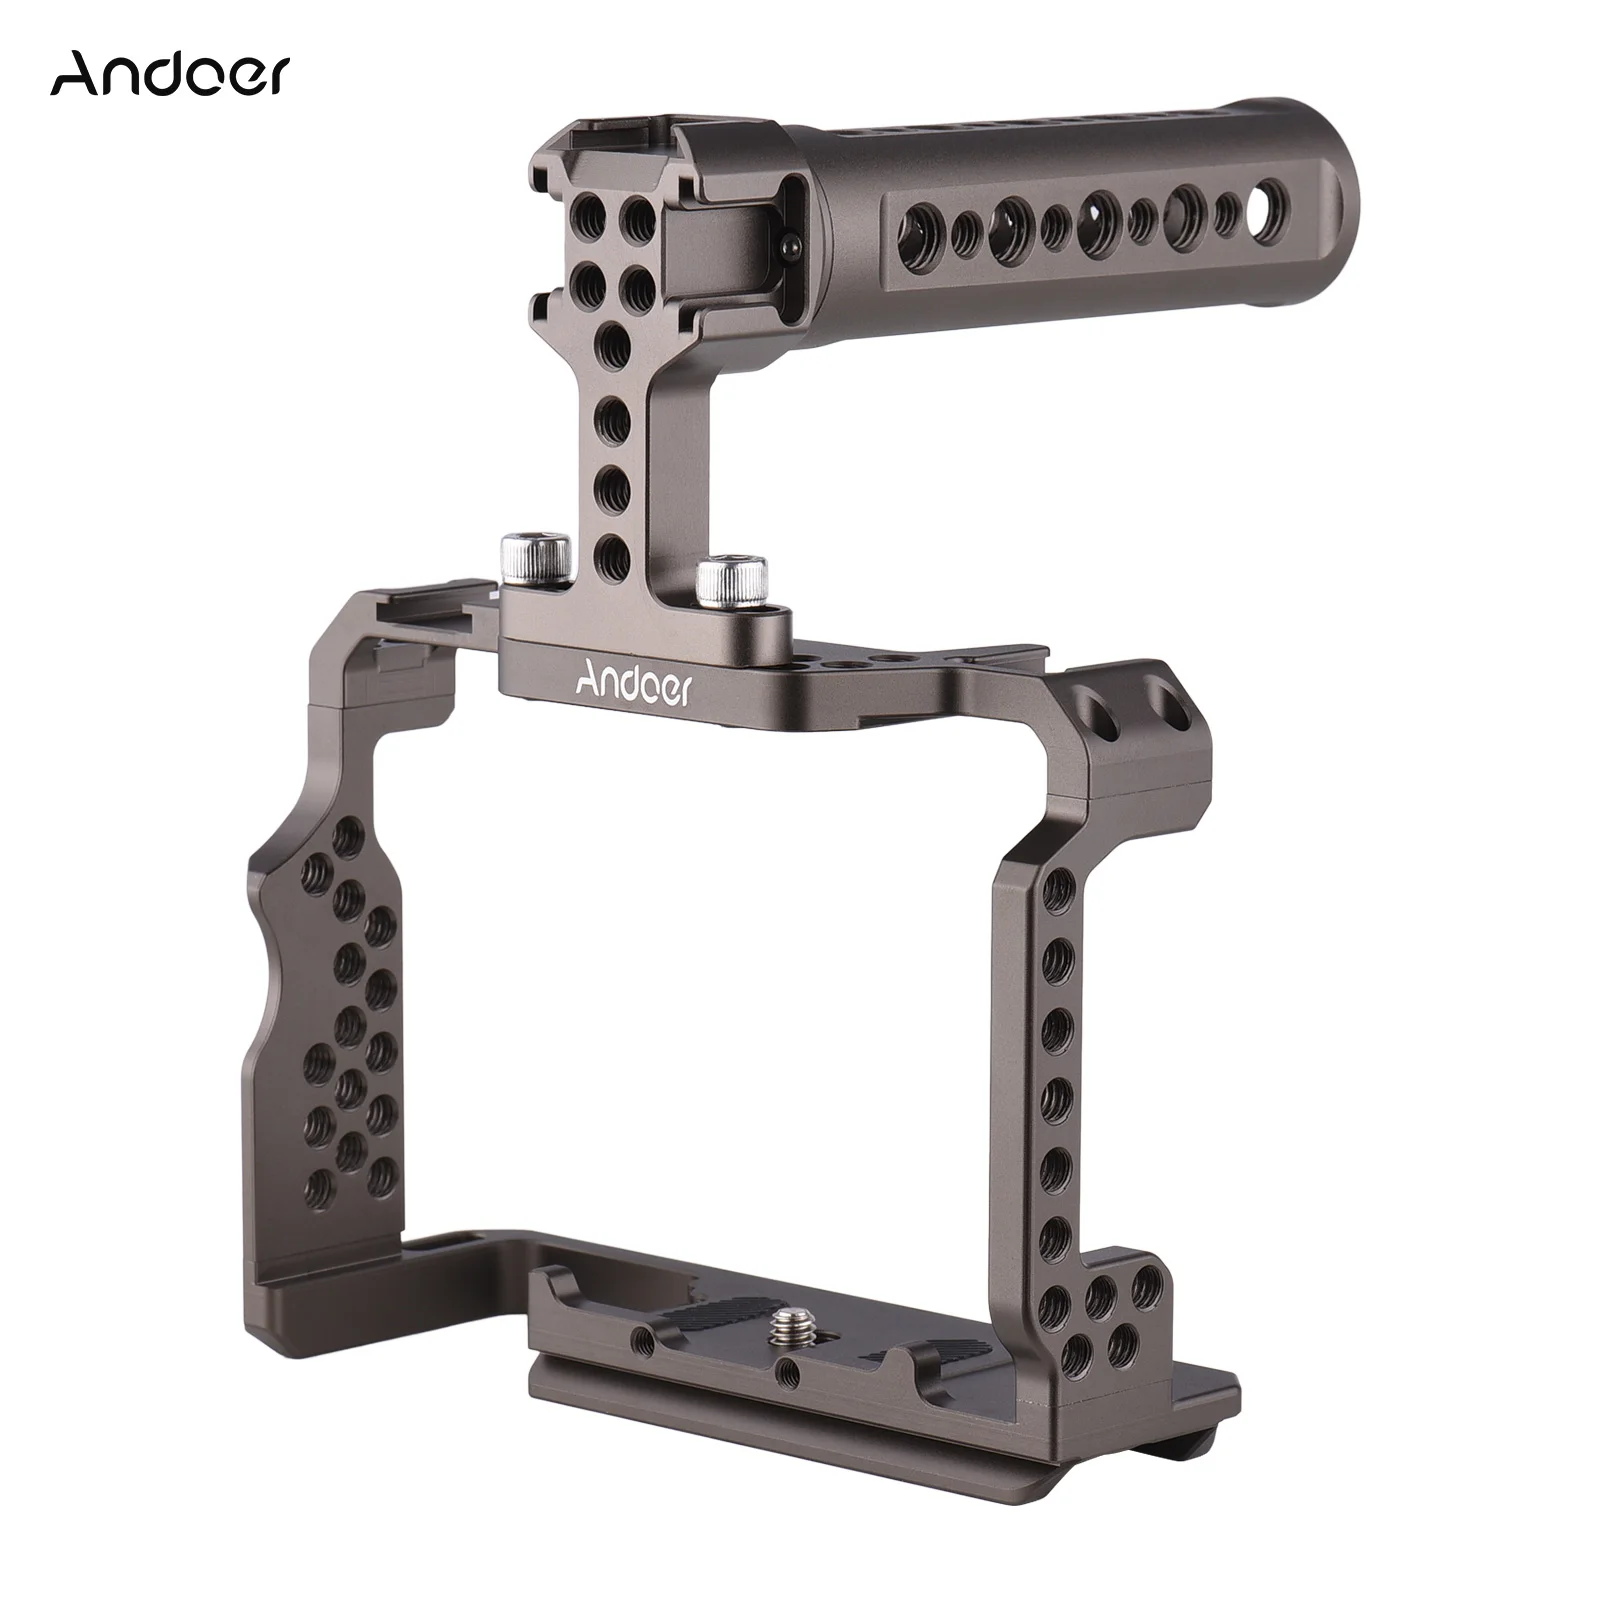 Photography Studio Aluminum Alloy Video Volg Camera Cage Kit with Video Rig Handle Grip Replacement for Sony A7R III/A7 II/A7III